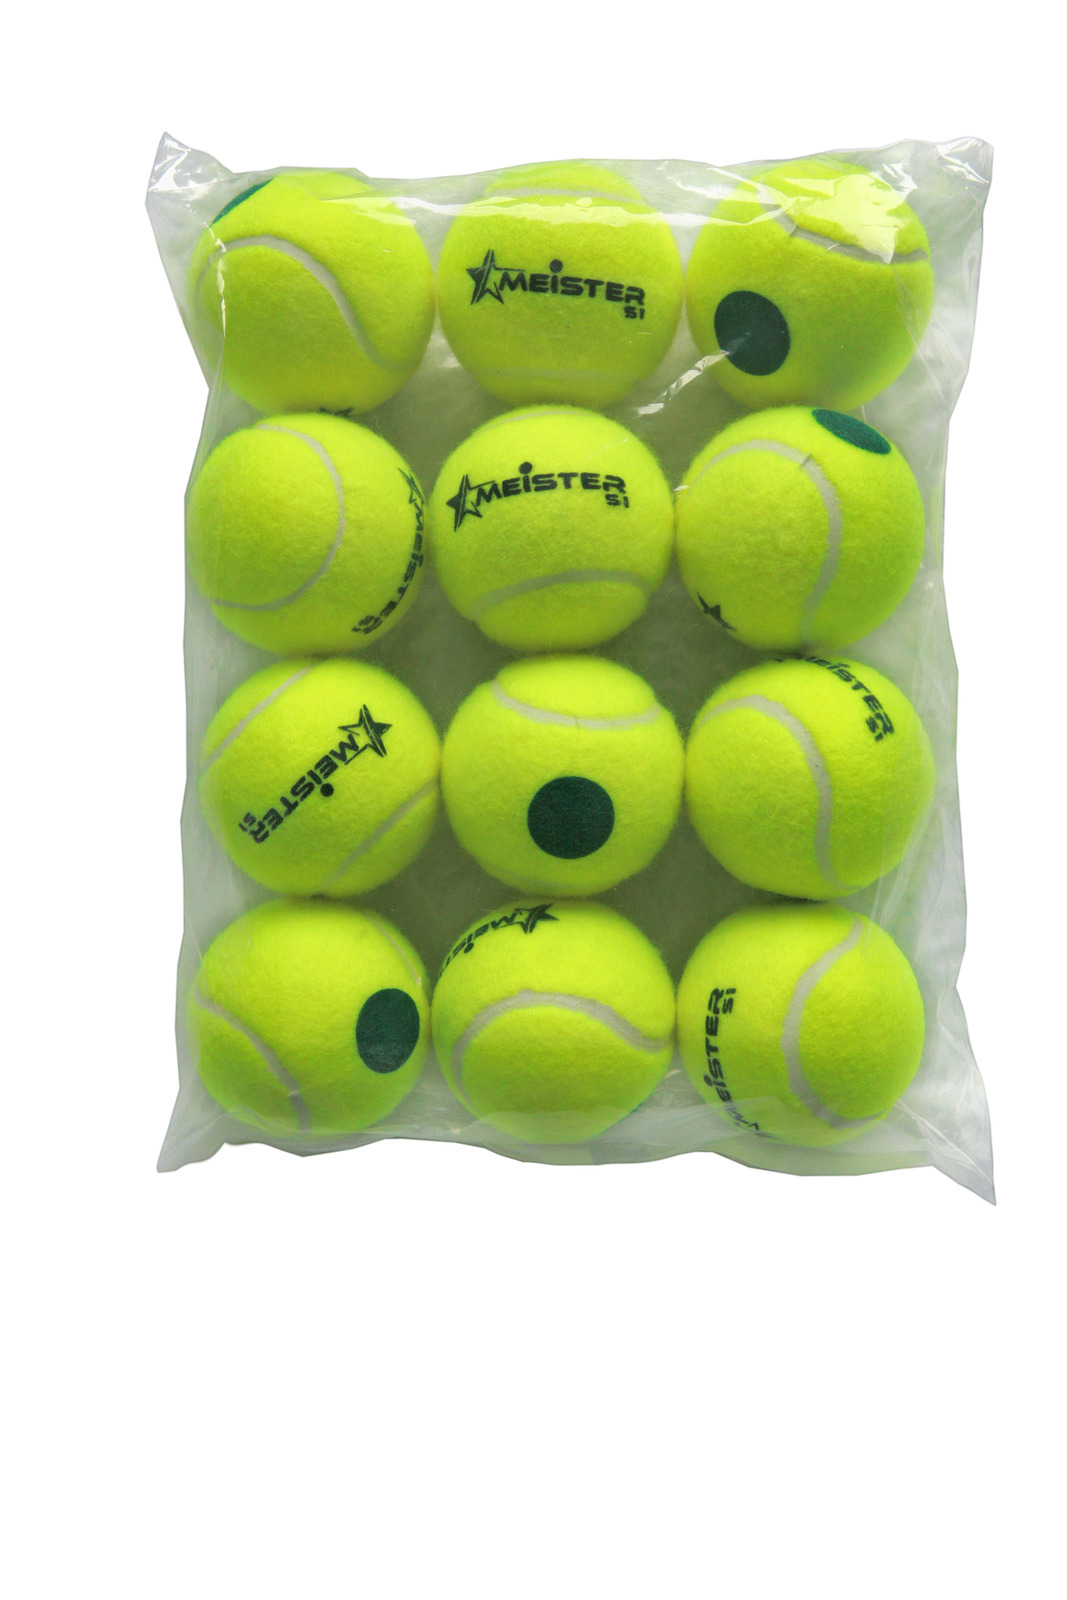 Red Spot Tennis Balls 75% slower bounce suits 5 to 8 Stage 3 72 x Meister S3 